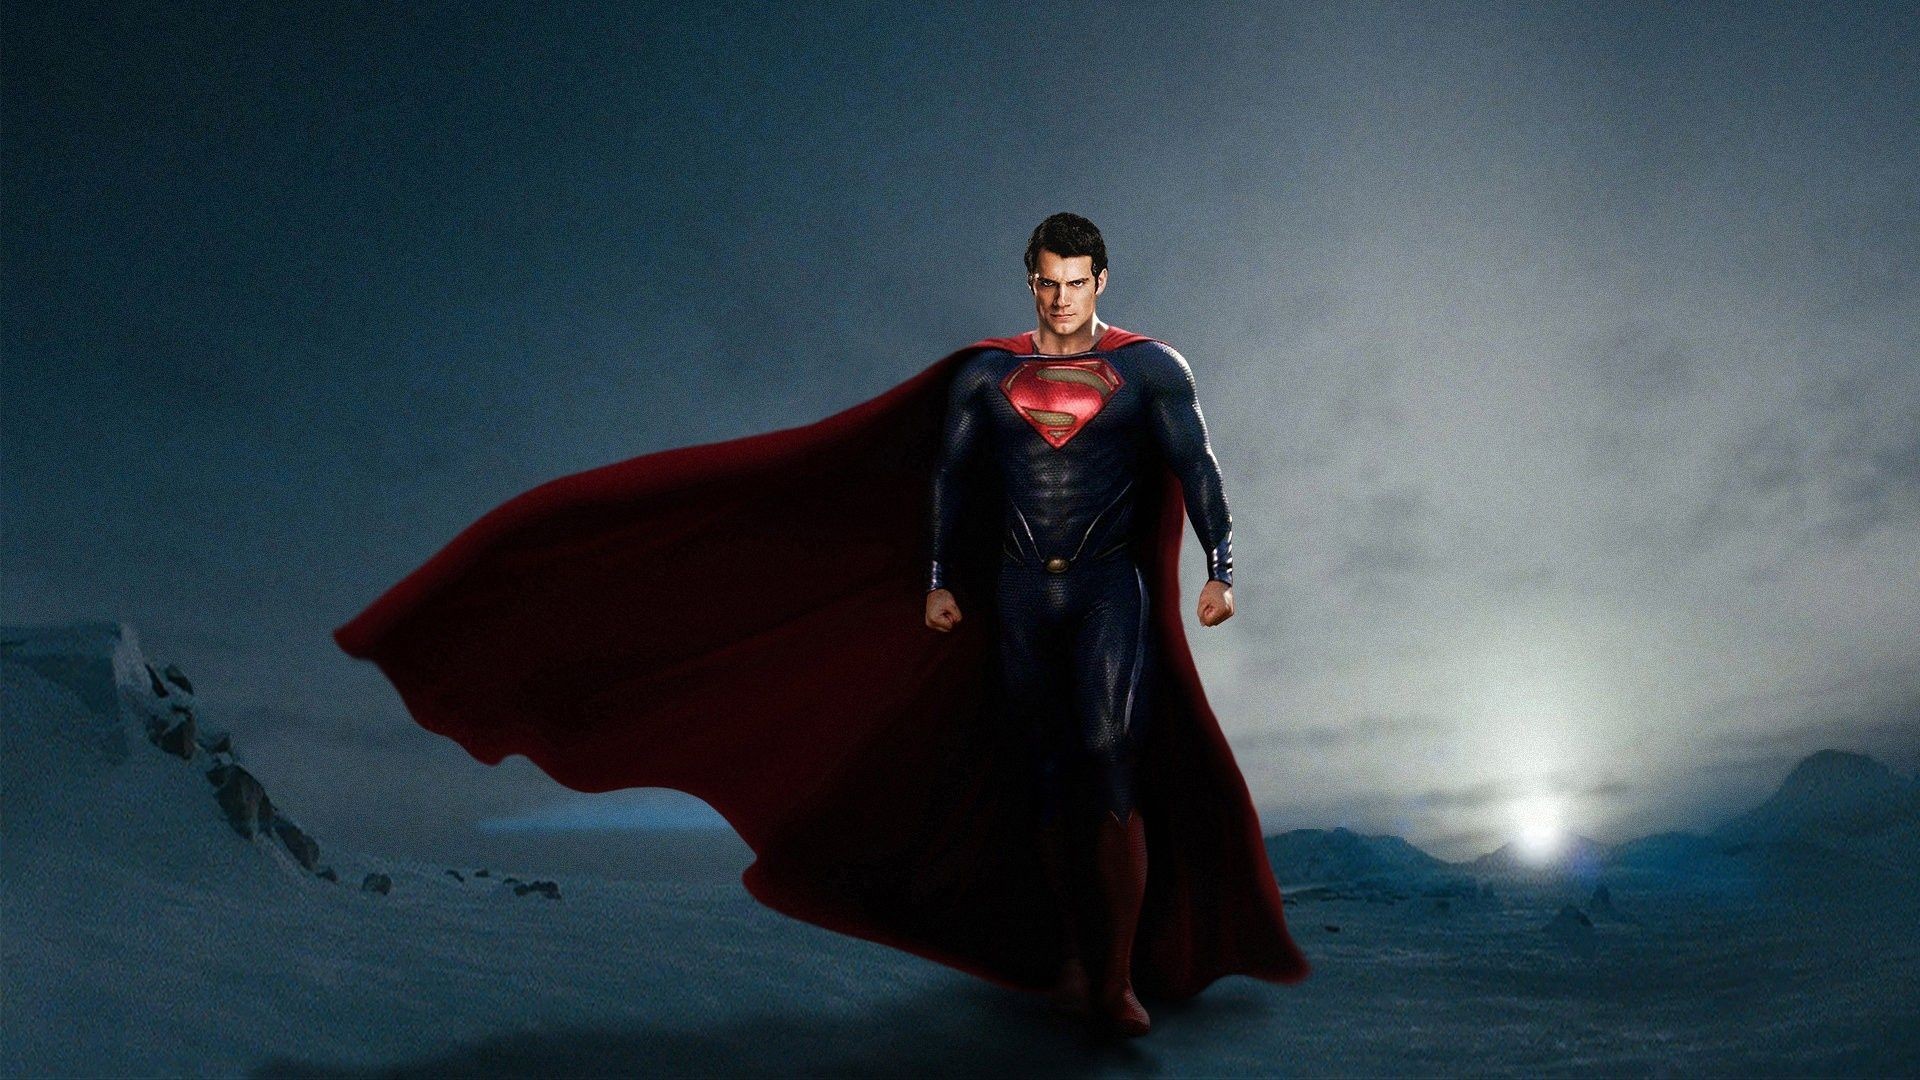 1920x1080 Superman Images Wallpapers (36 Wallpapers)